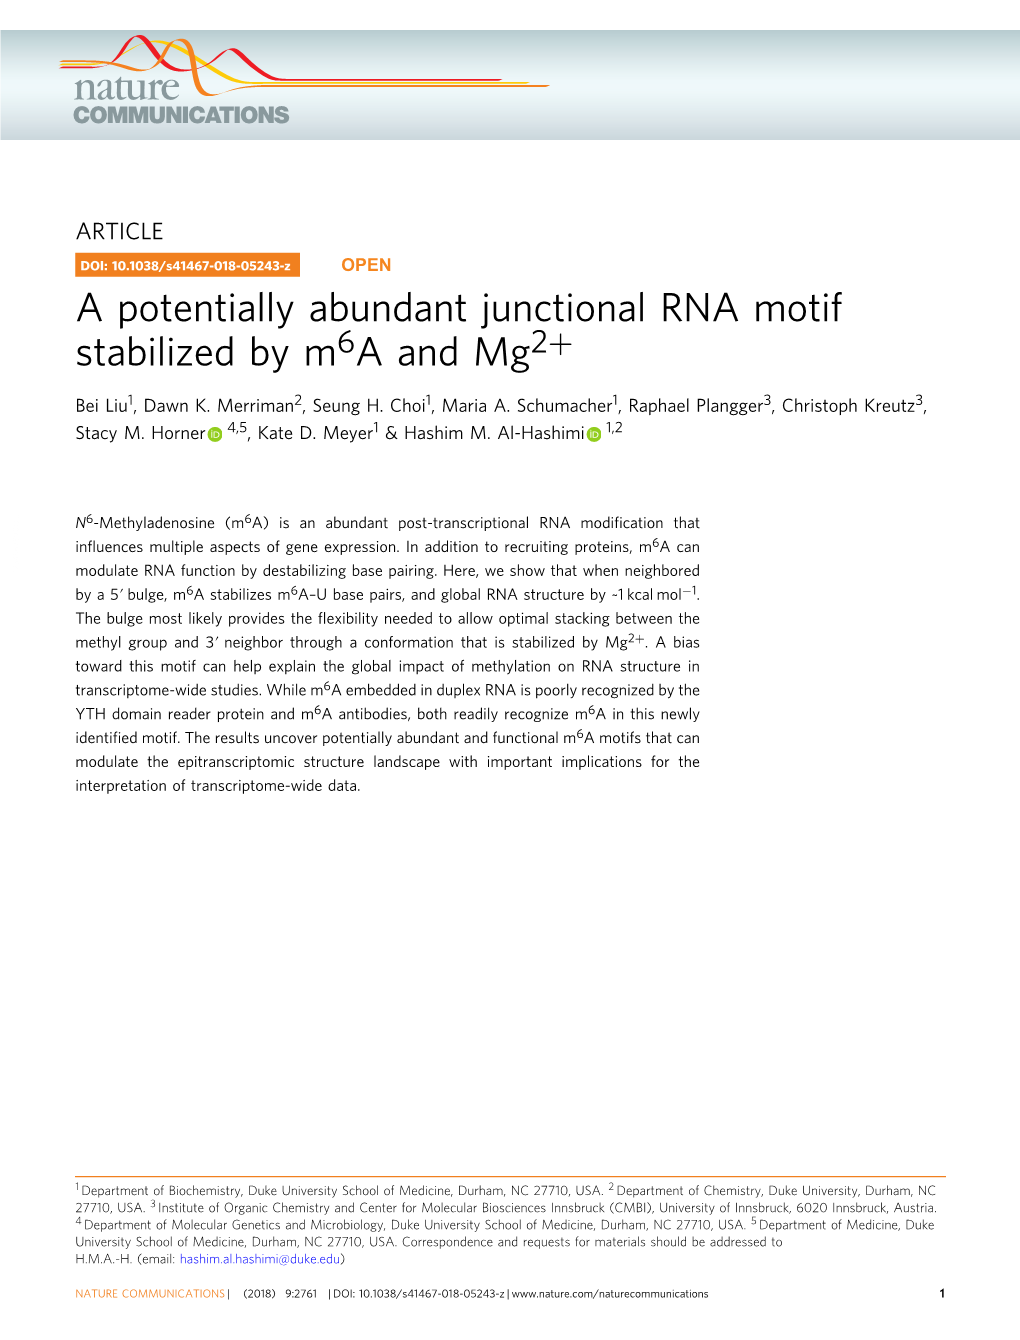 A Potentially Abundant Junctional RNA Motif Stabilized by M6a and Mg2+